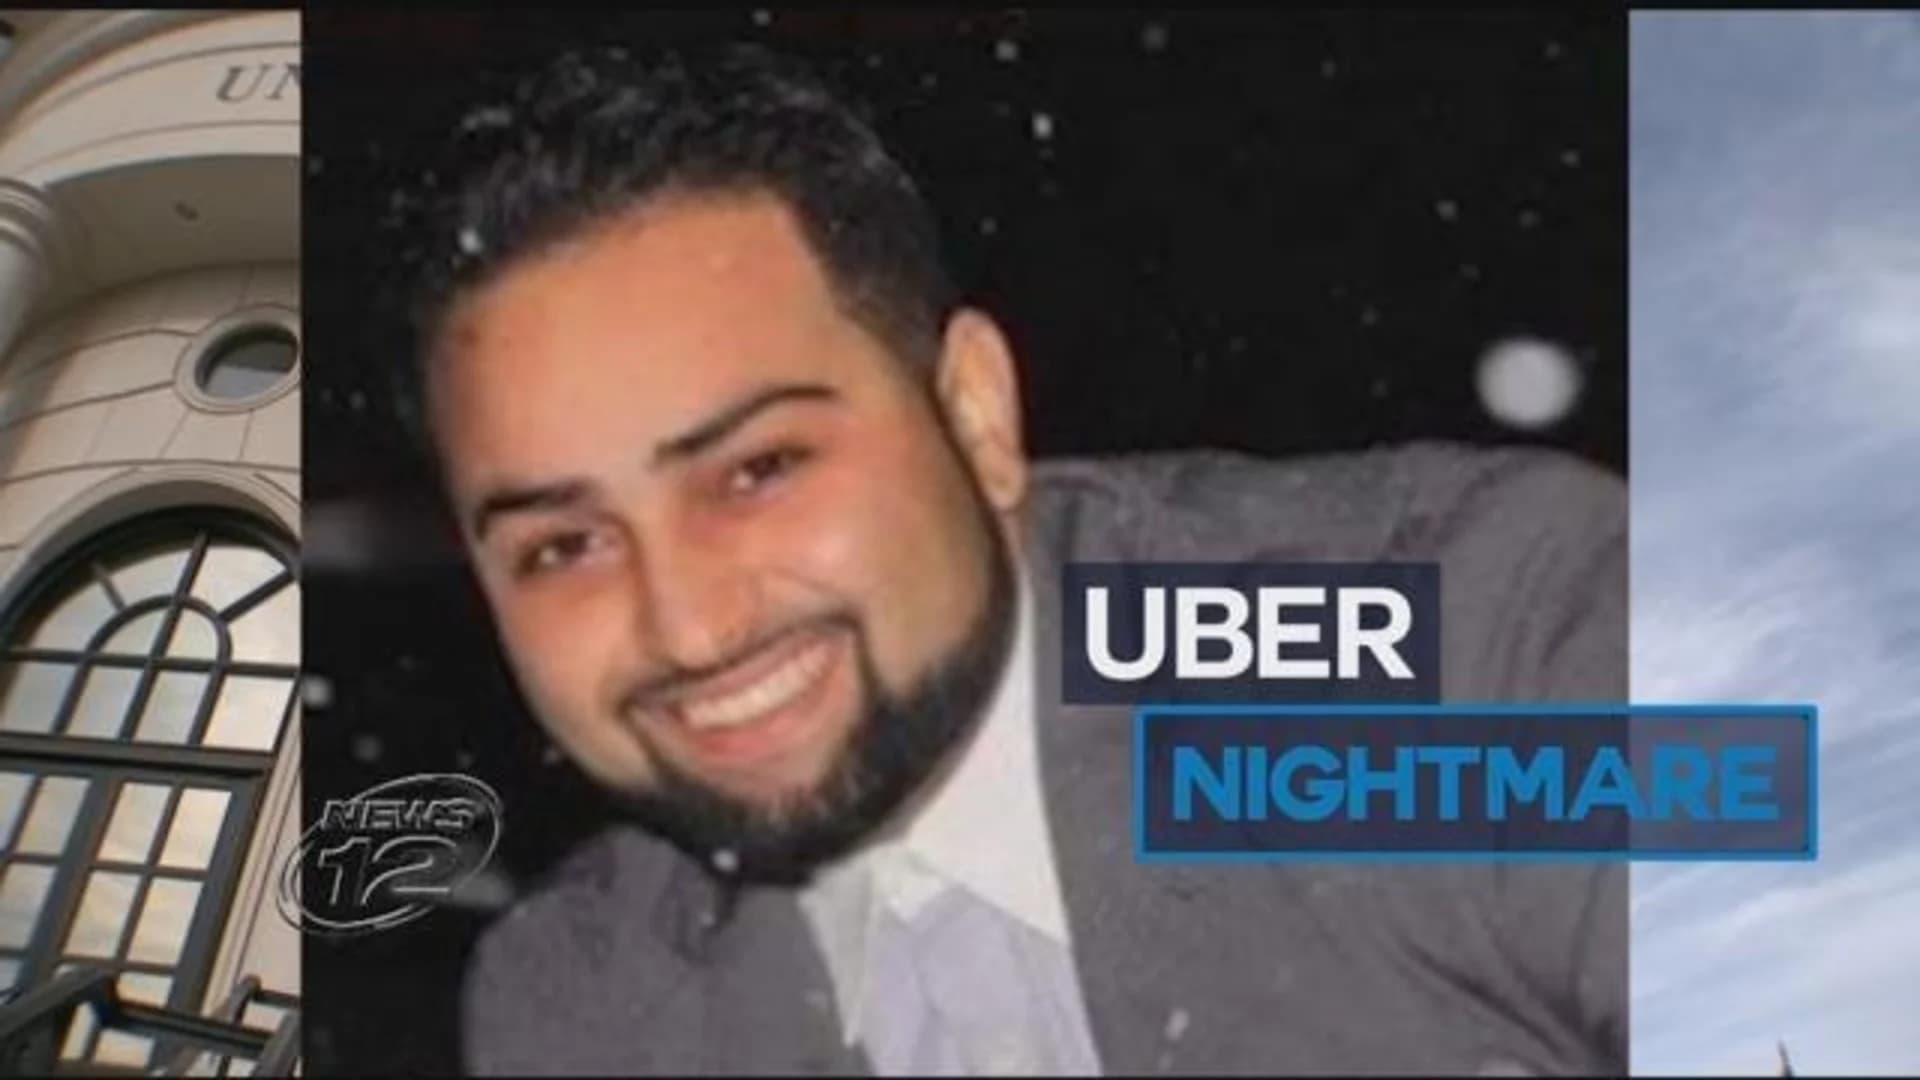 News 12's Most-Viewed: #7 - Uber driver charged with kidnapping, assaulting White Plains woman